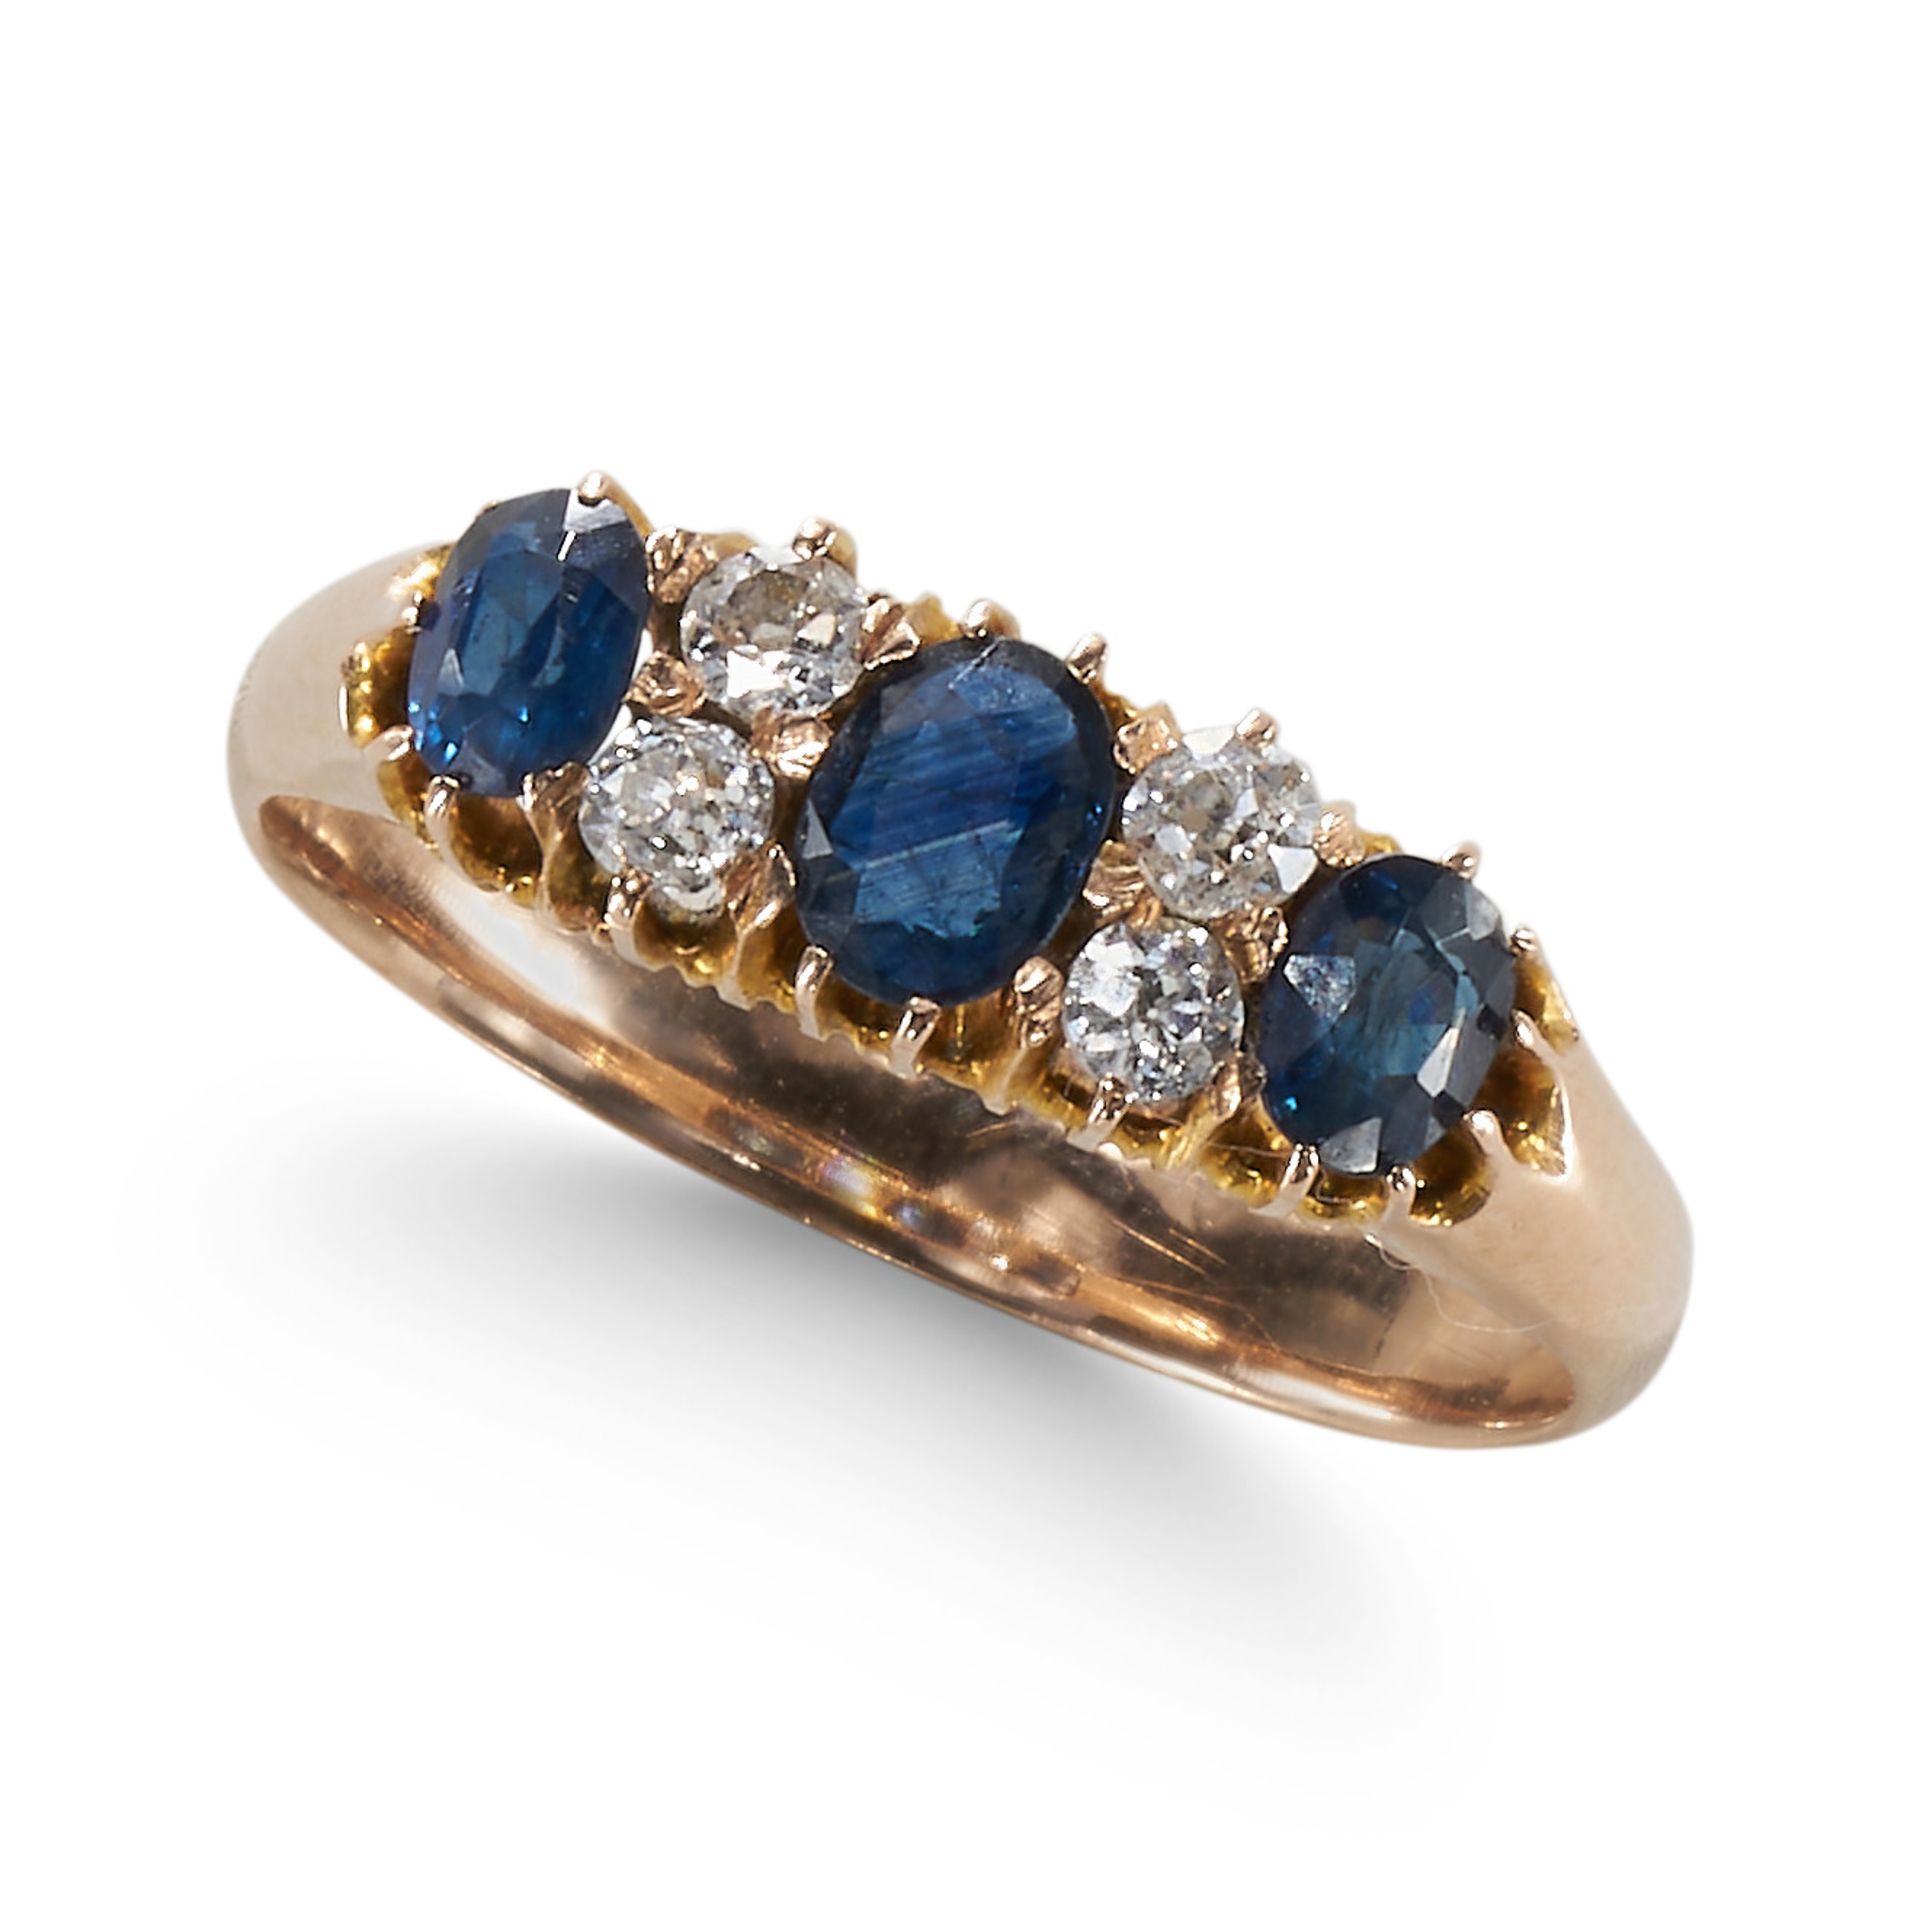 NO RESERVE, AN ANTIQUE SAPPHIRE AND DIAMOND SEVEN STONE RING.